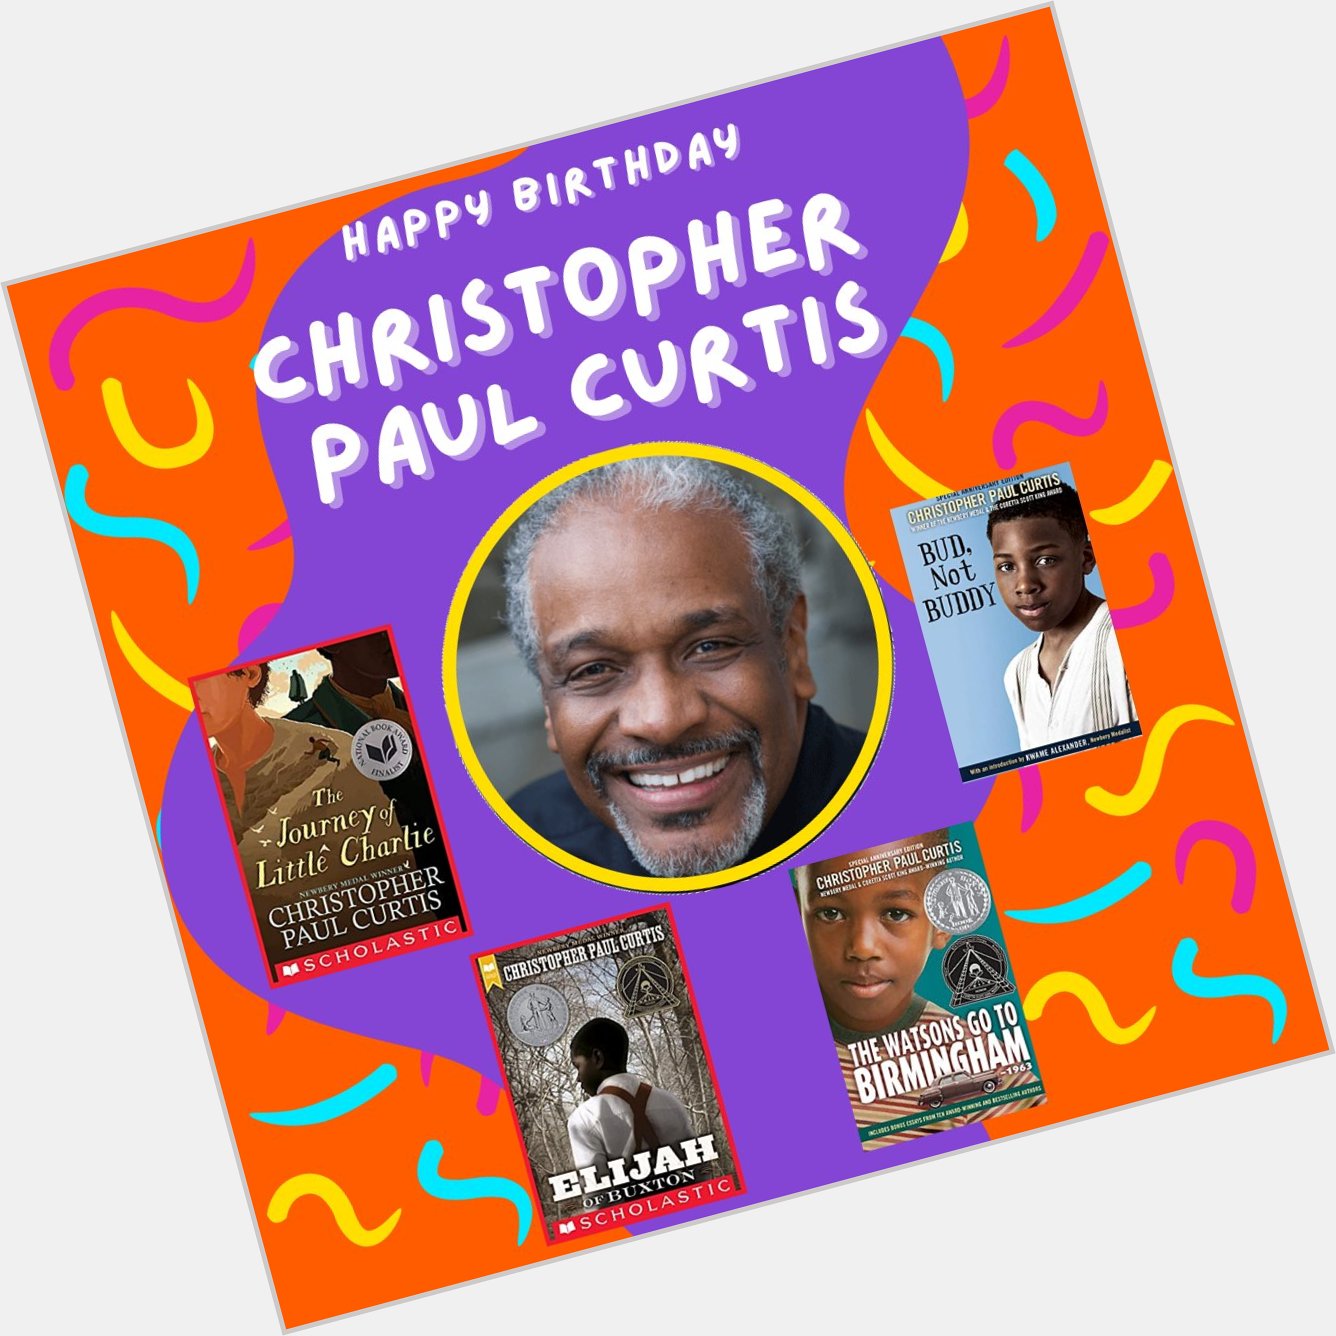 Happy birthday to the awesome author, Christopher Paul Curtis! 